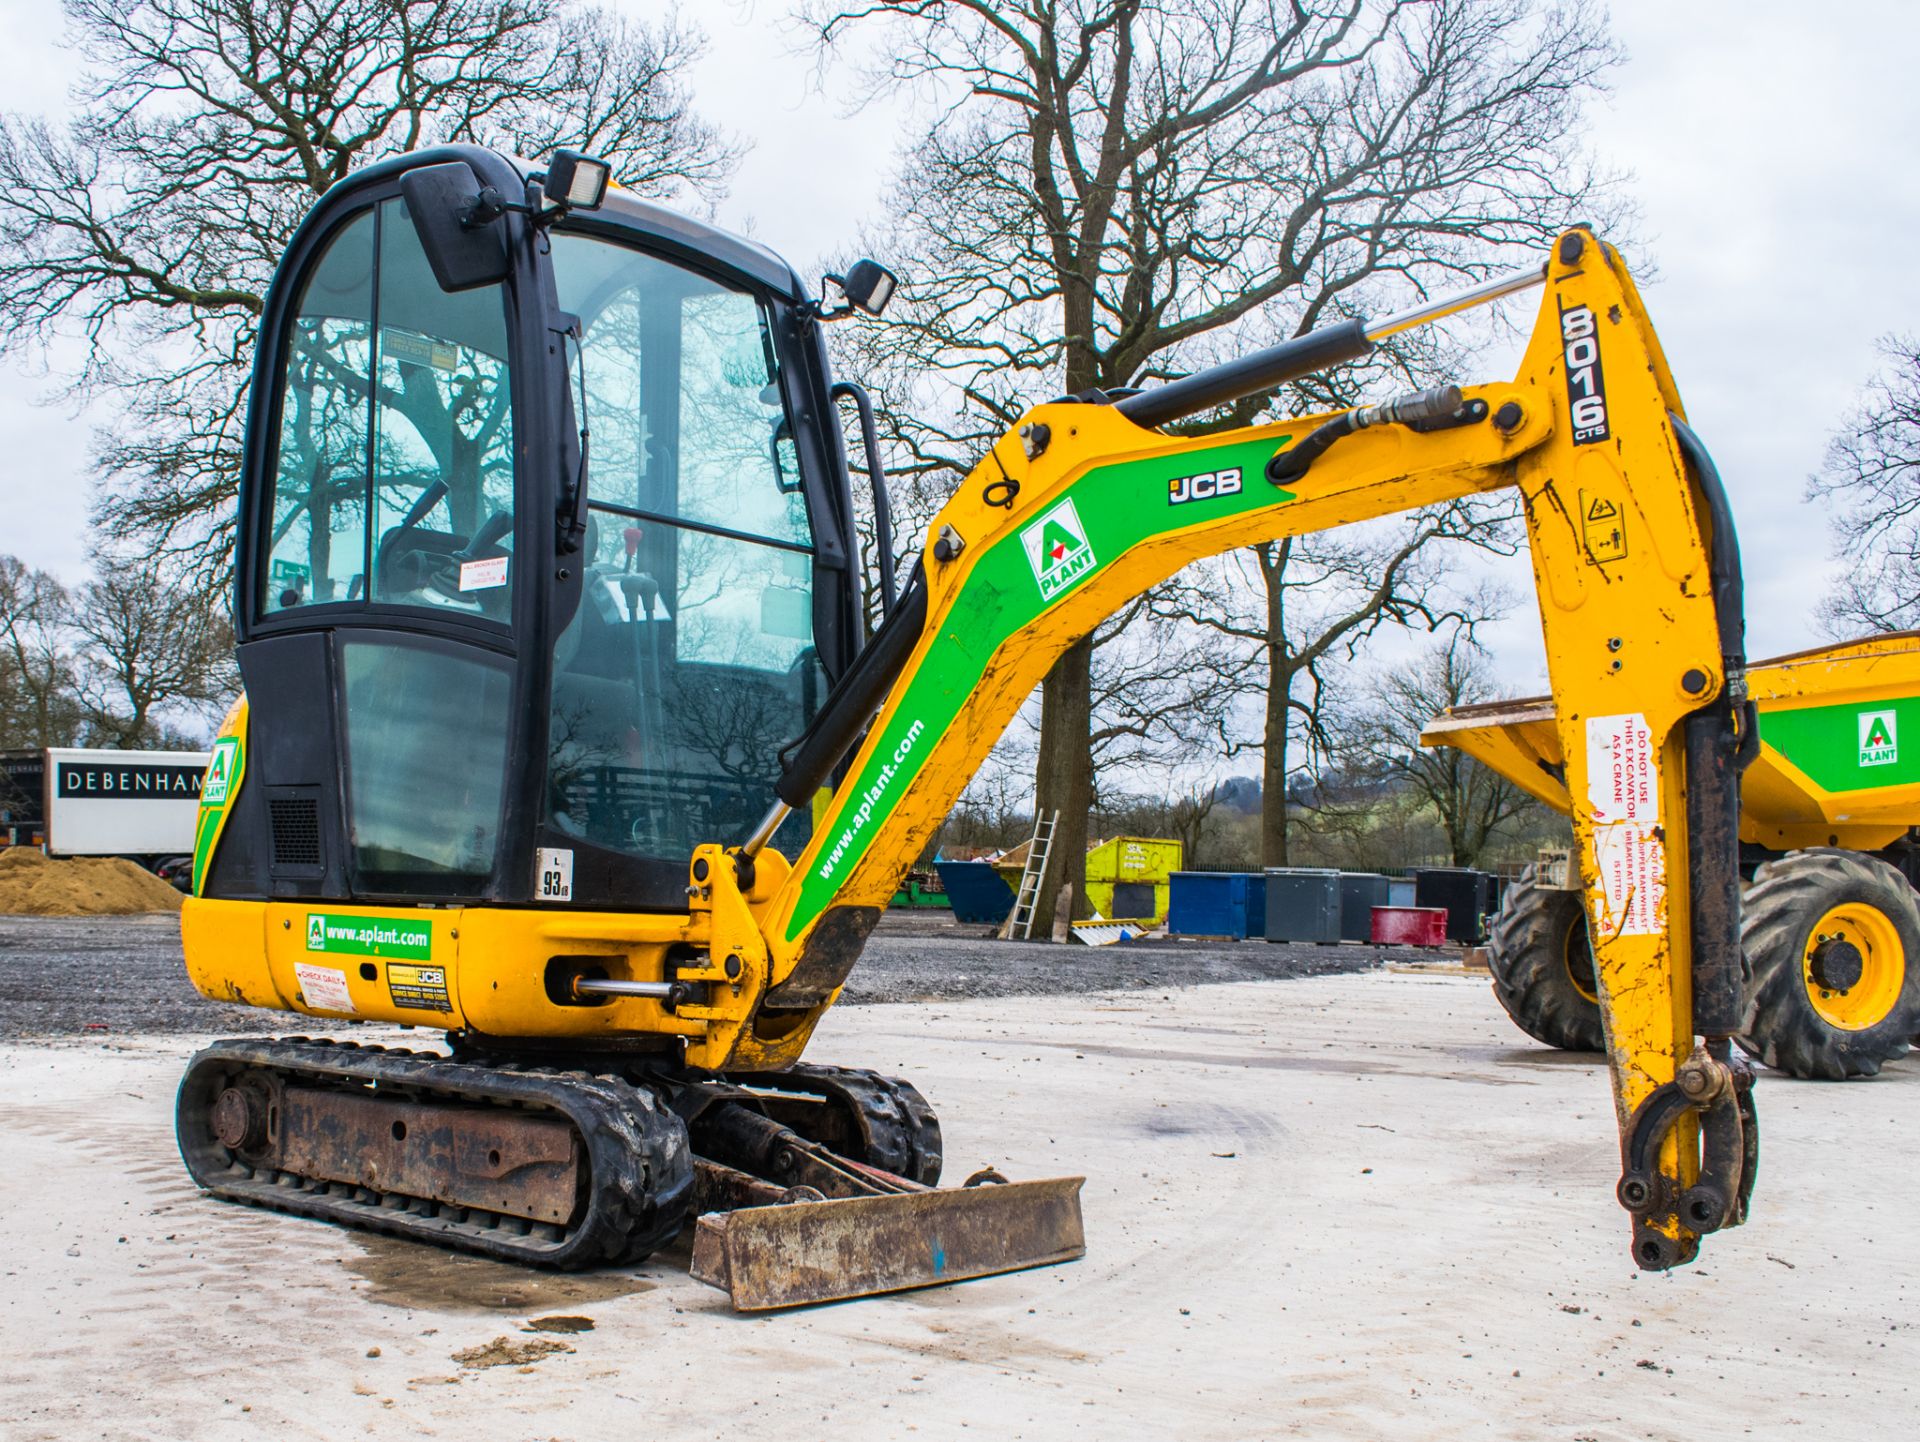 JCB 801.6 1.5 tonne rubber tracked mini excavator Year: 2015 S/N: 2071769 Recorded Hours: 1518 - Image 2 of 17